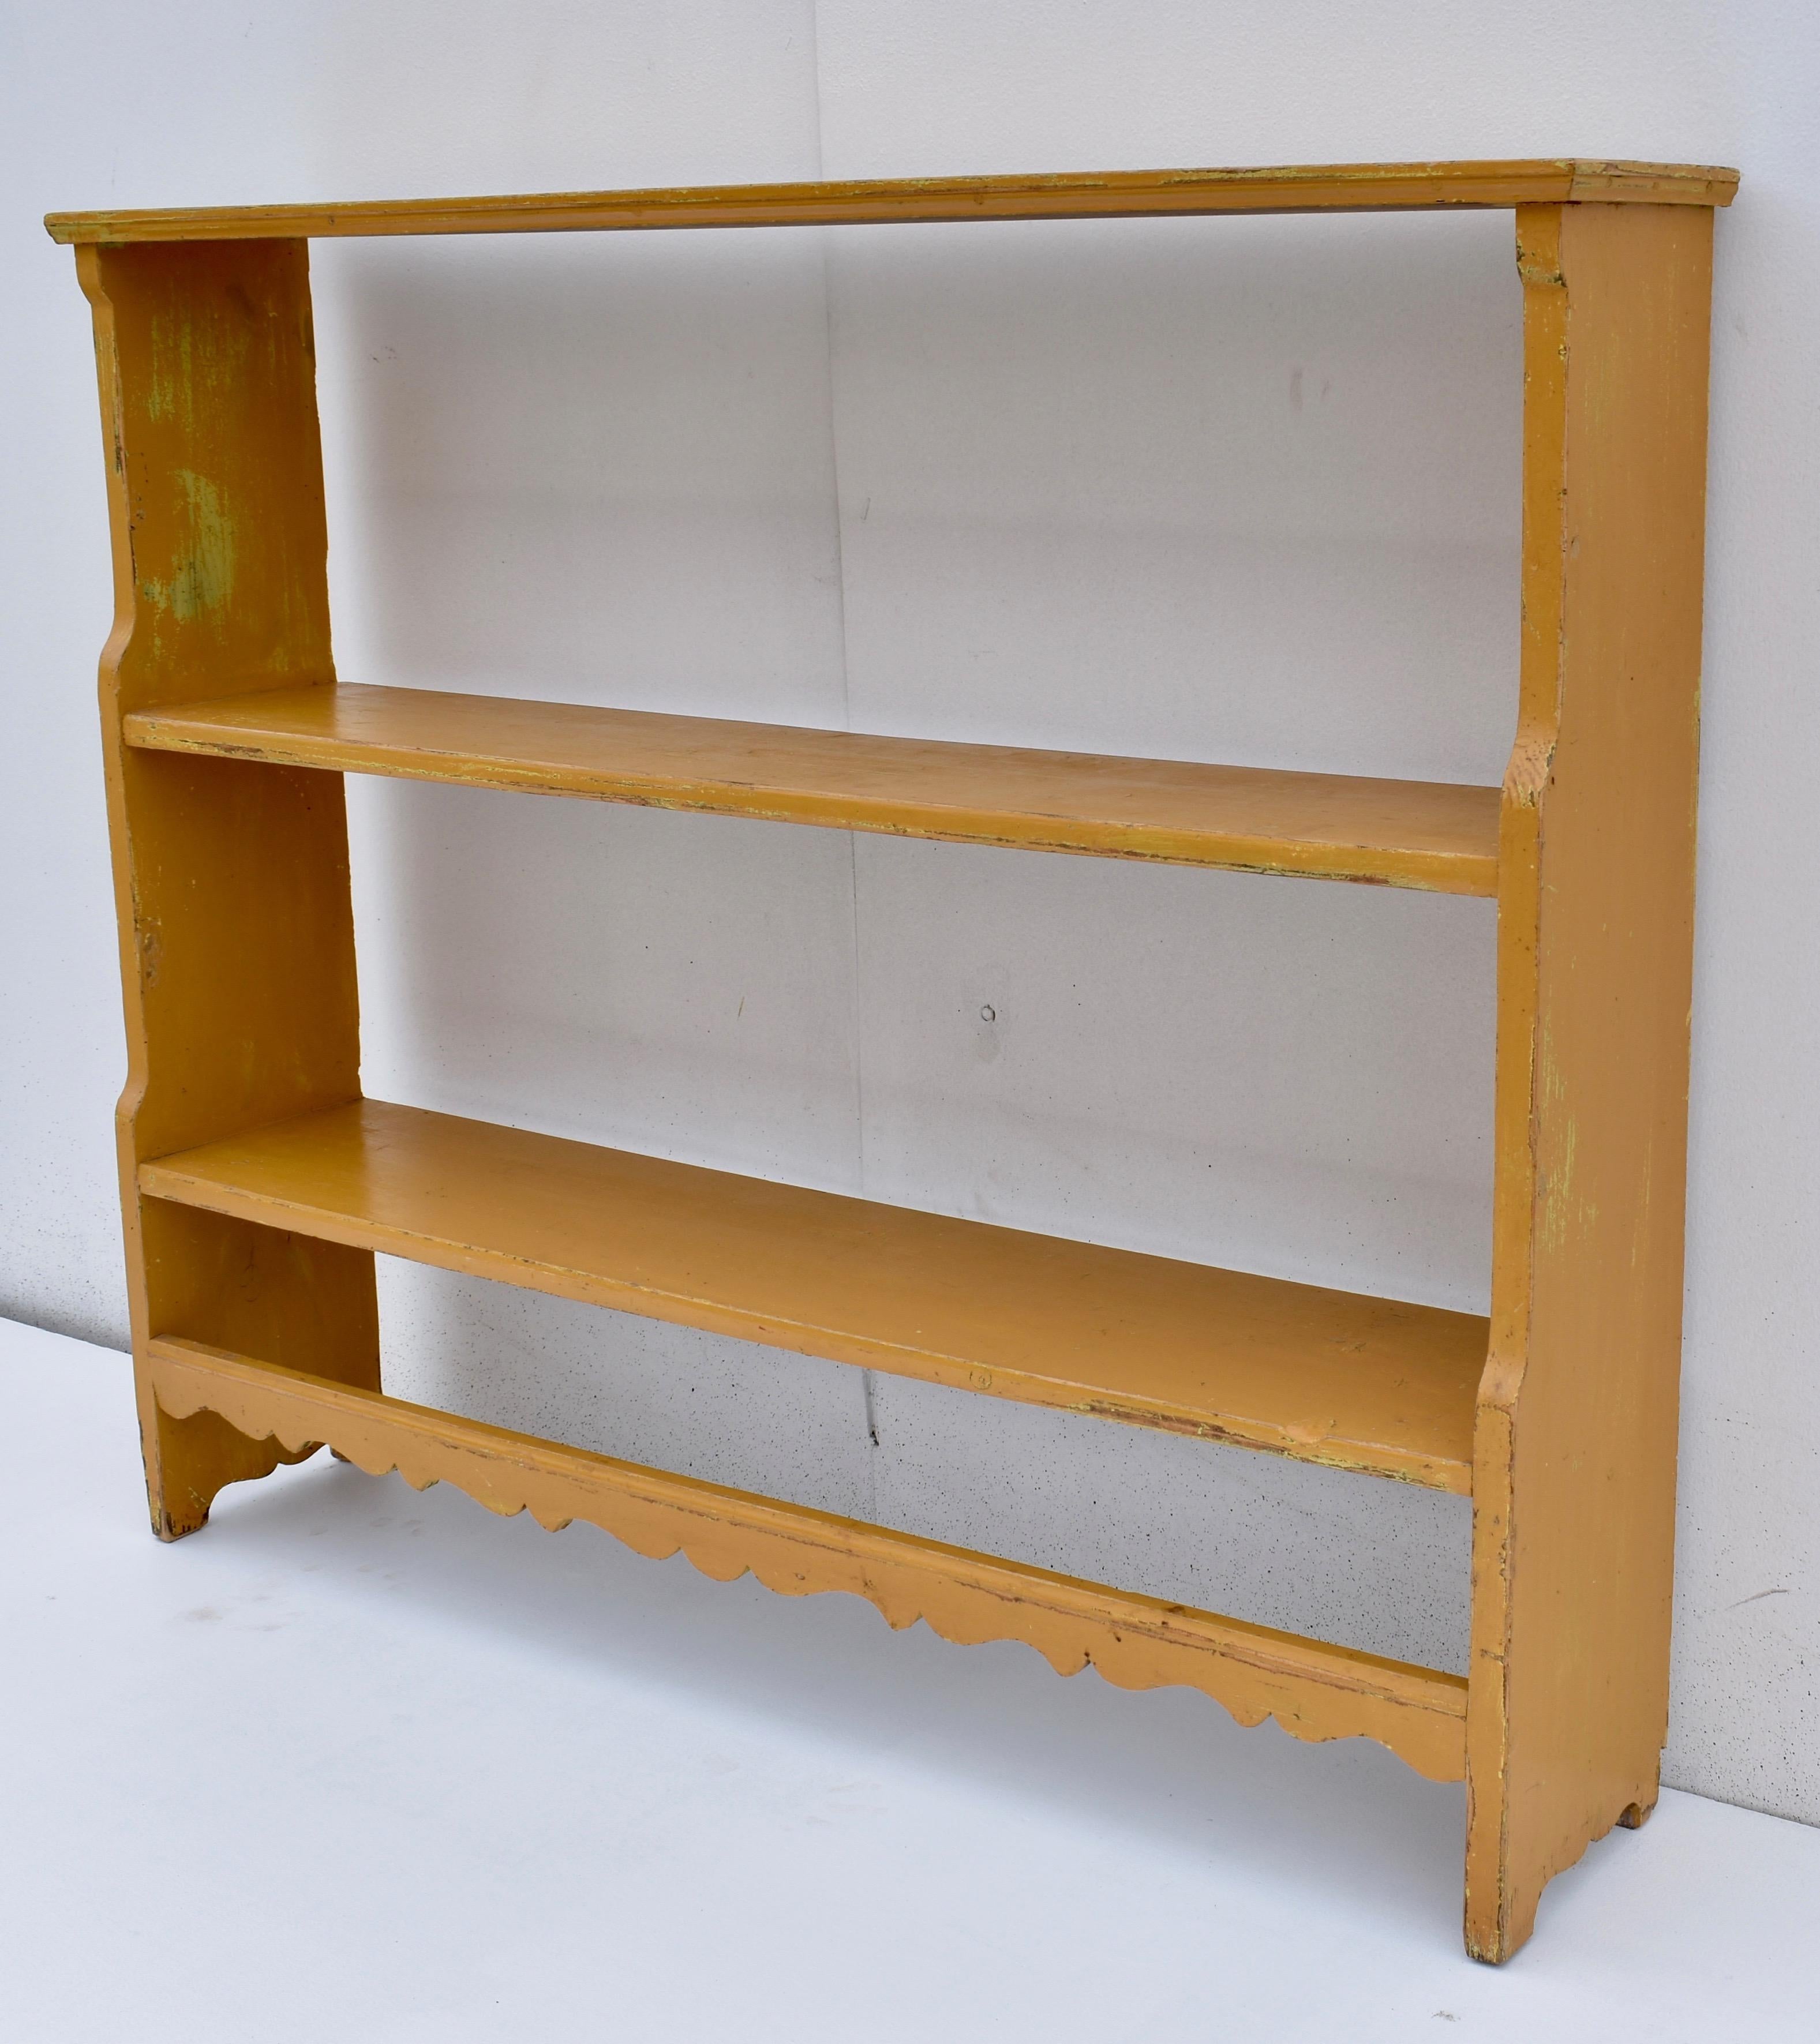 Country Painted Pine Bookshelves or Utility Shelves